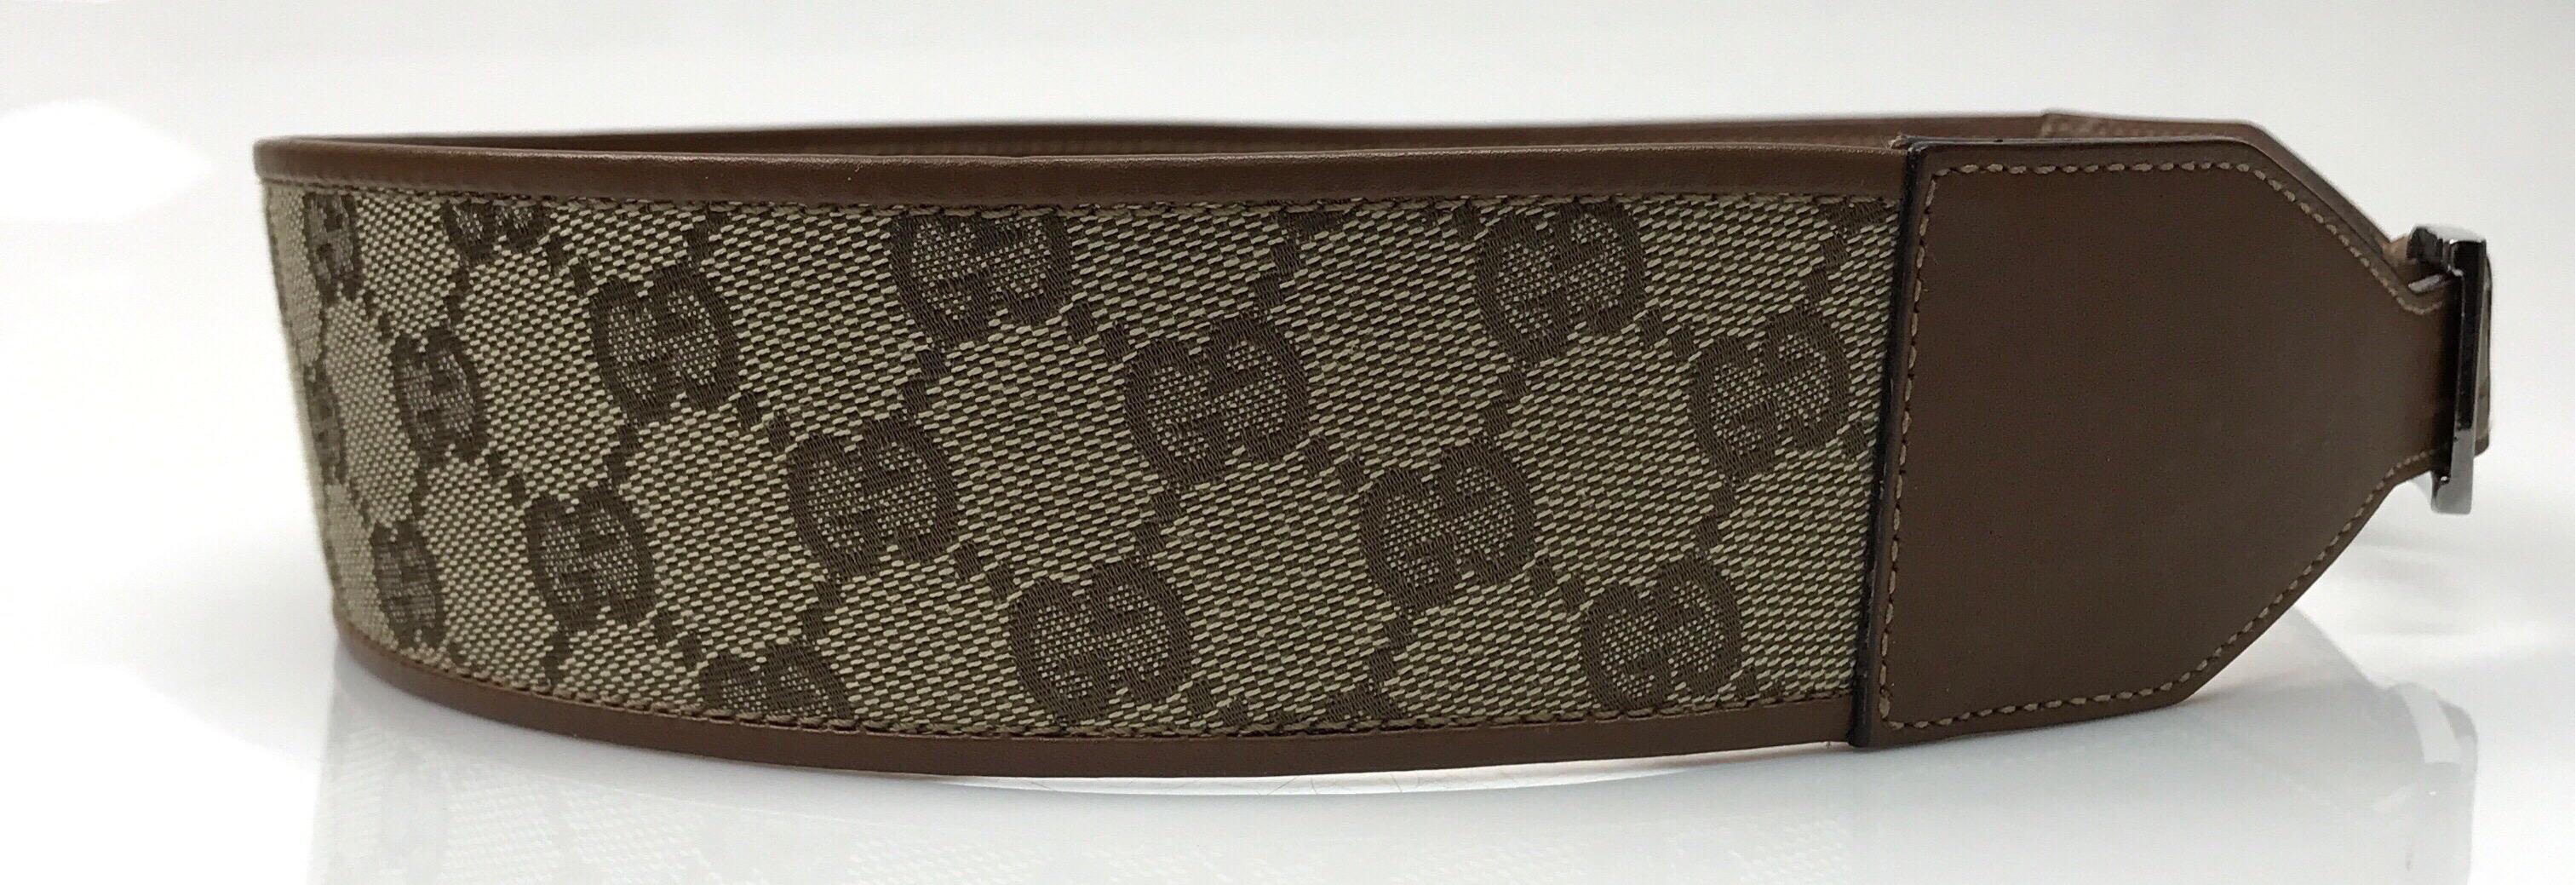 Gucci Brown Monogram Thick Waist Belt. This amazing Gucci belt is in excellent condition. There is no visible sign of use. The belt is made of brown leather and have a monogrammed design. It is a thick waist belt with a silver buckle. This belt has